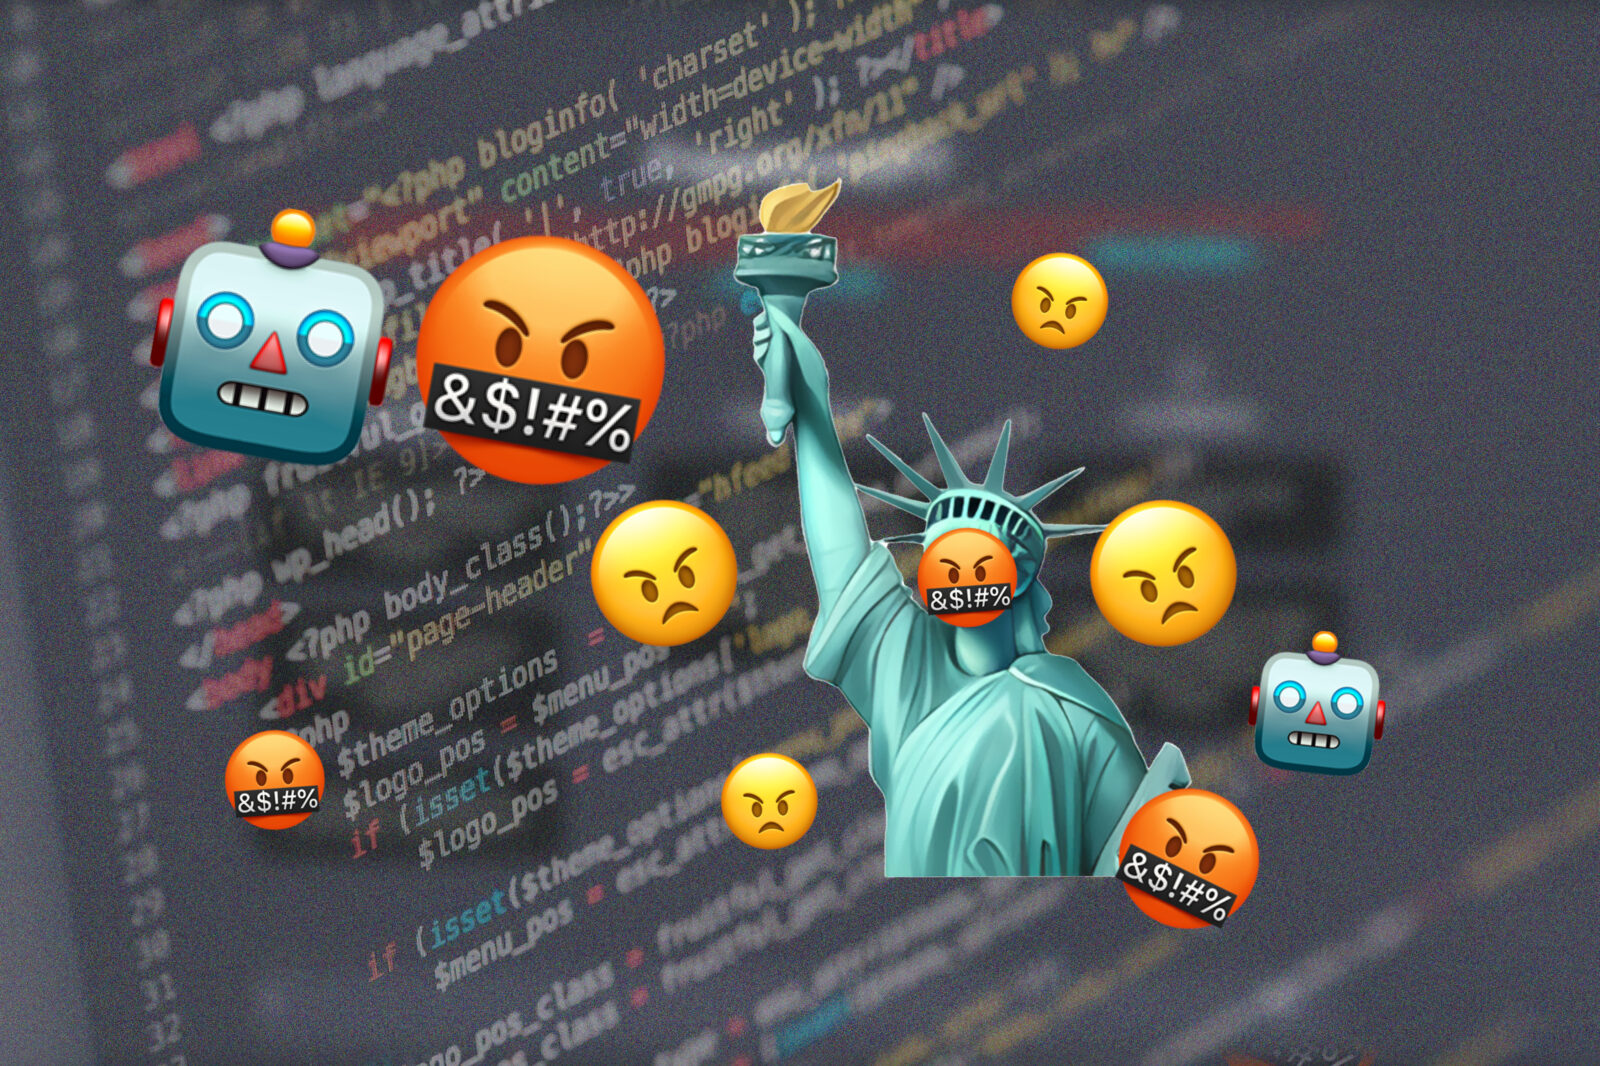 A New Uncensored Chatbot Shows How Unhinged AI Can Get Without Ethical  Guardrails - RELEVANT